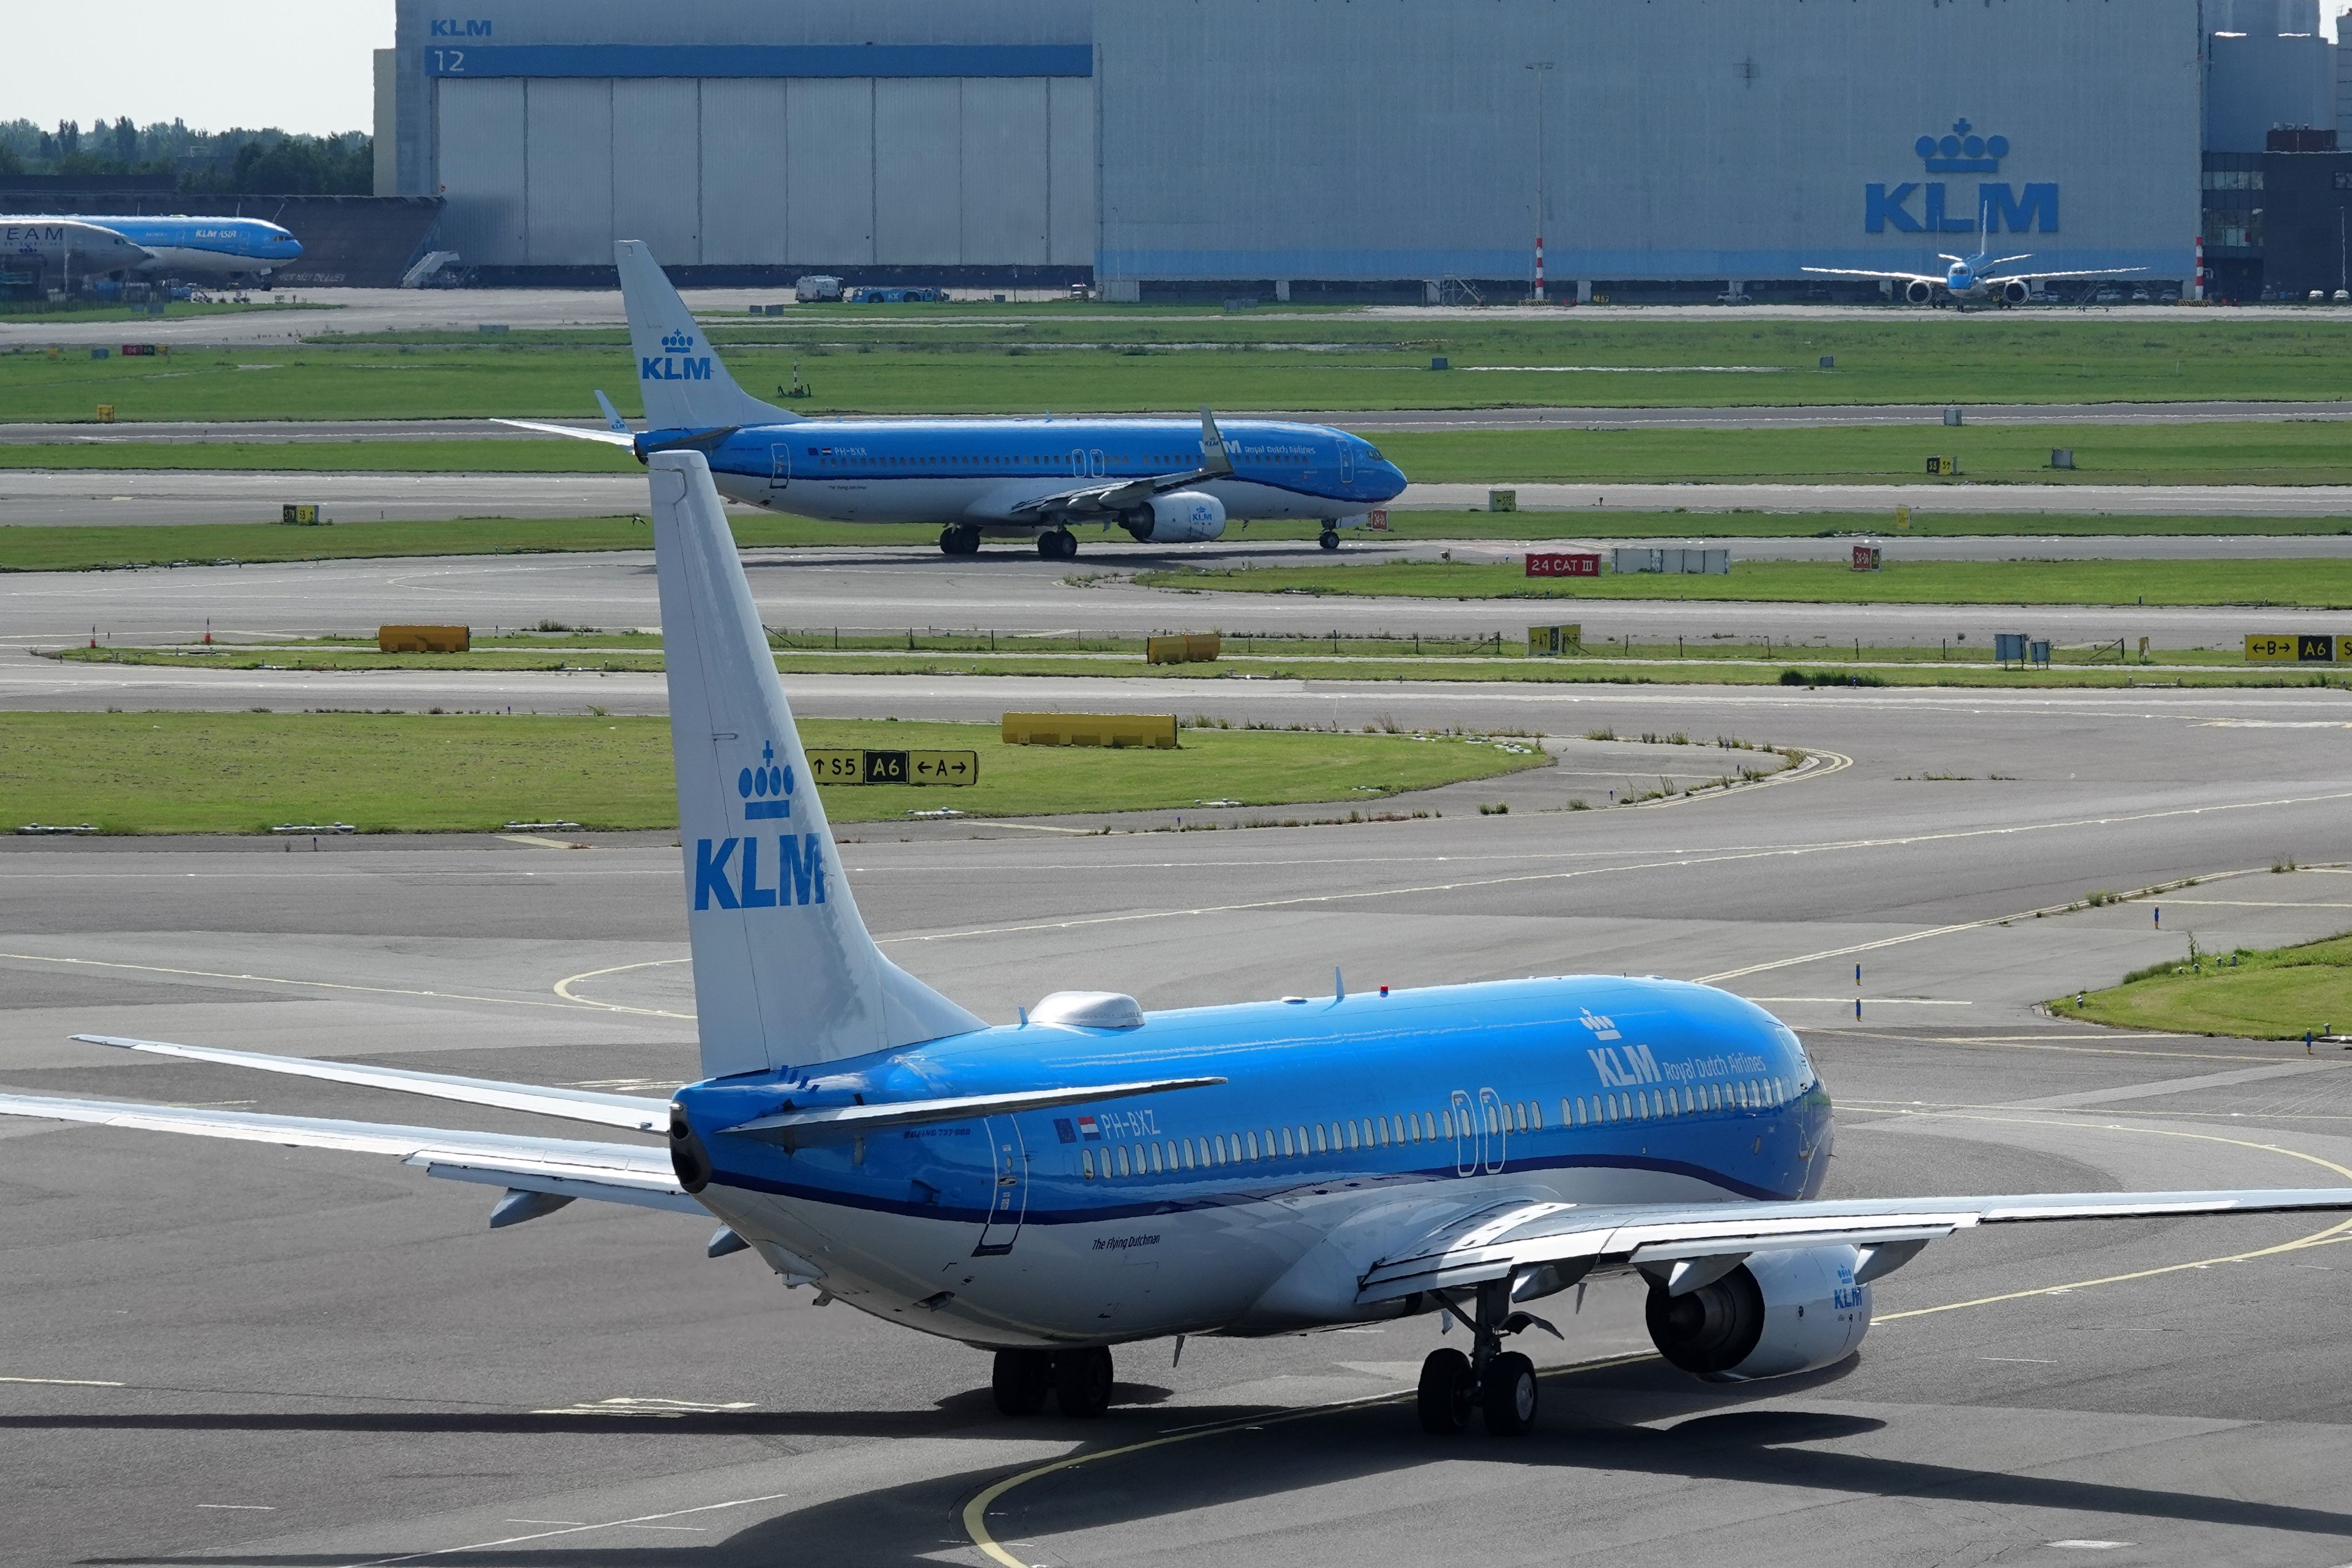 KLM planes at Amsterdam Schiphol Airport